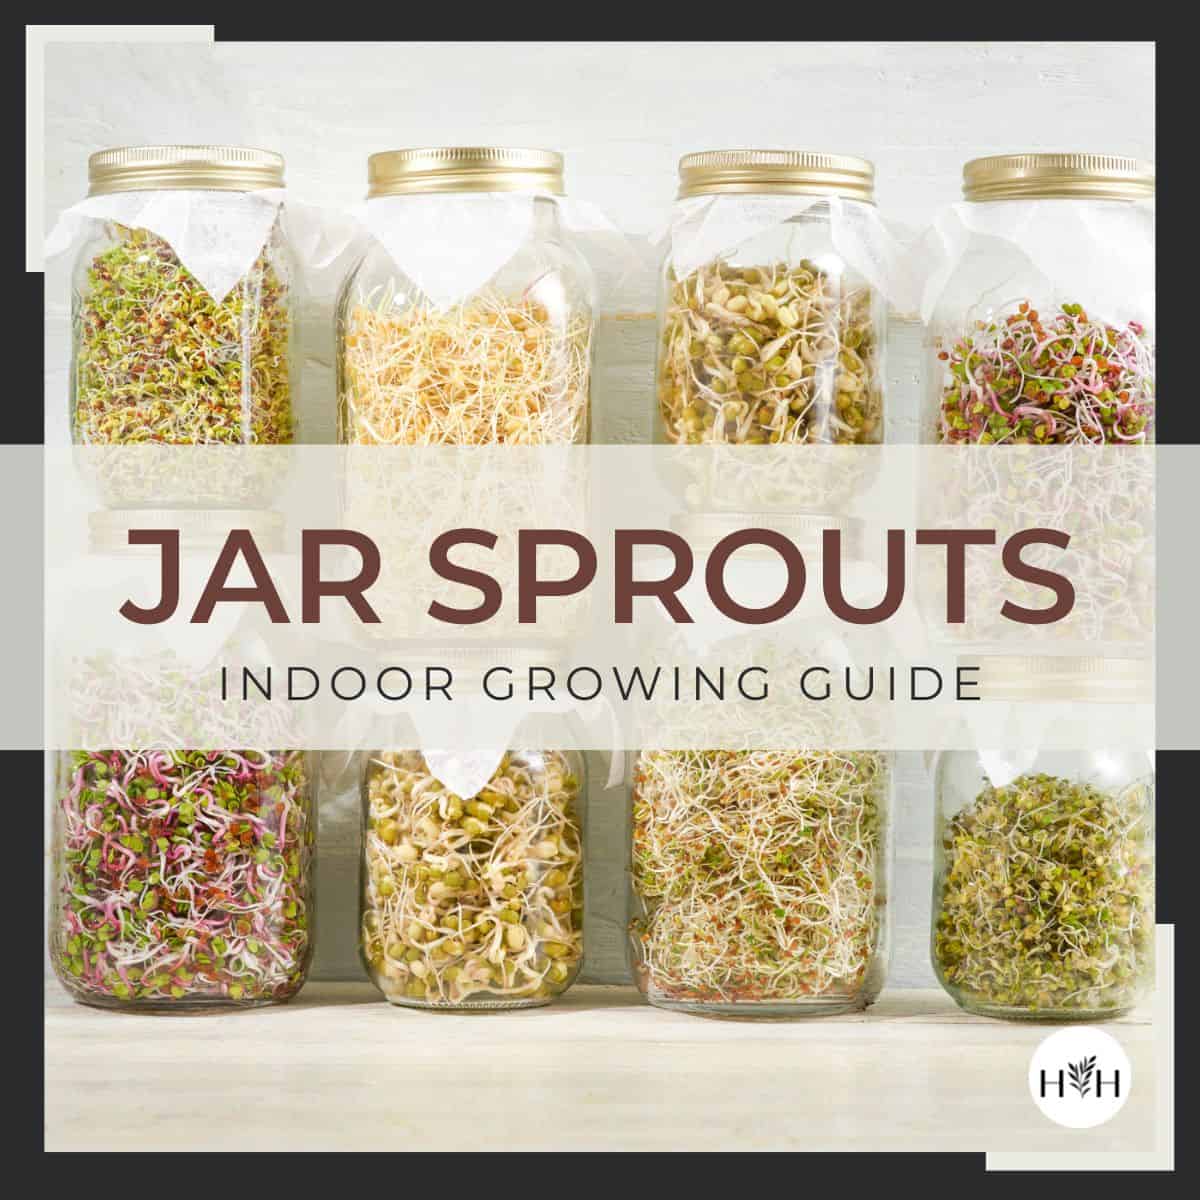 Jar sprouts - indoor growing guide via @home4theharvest